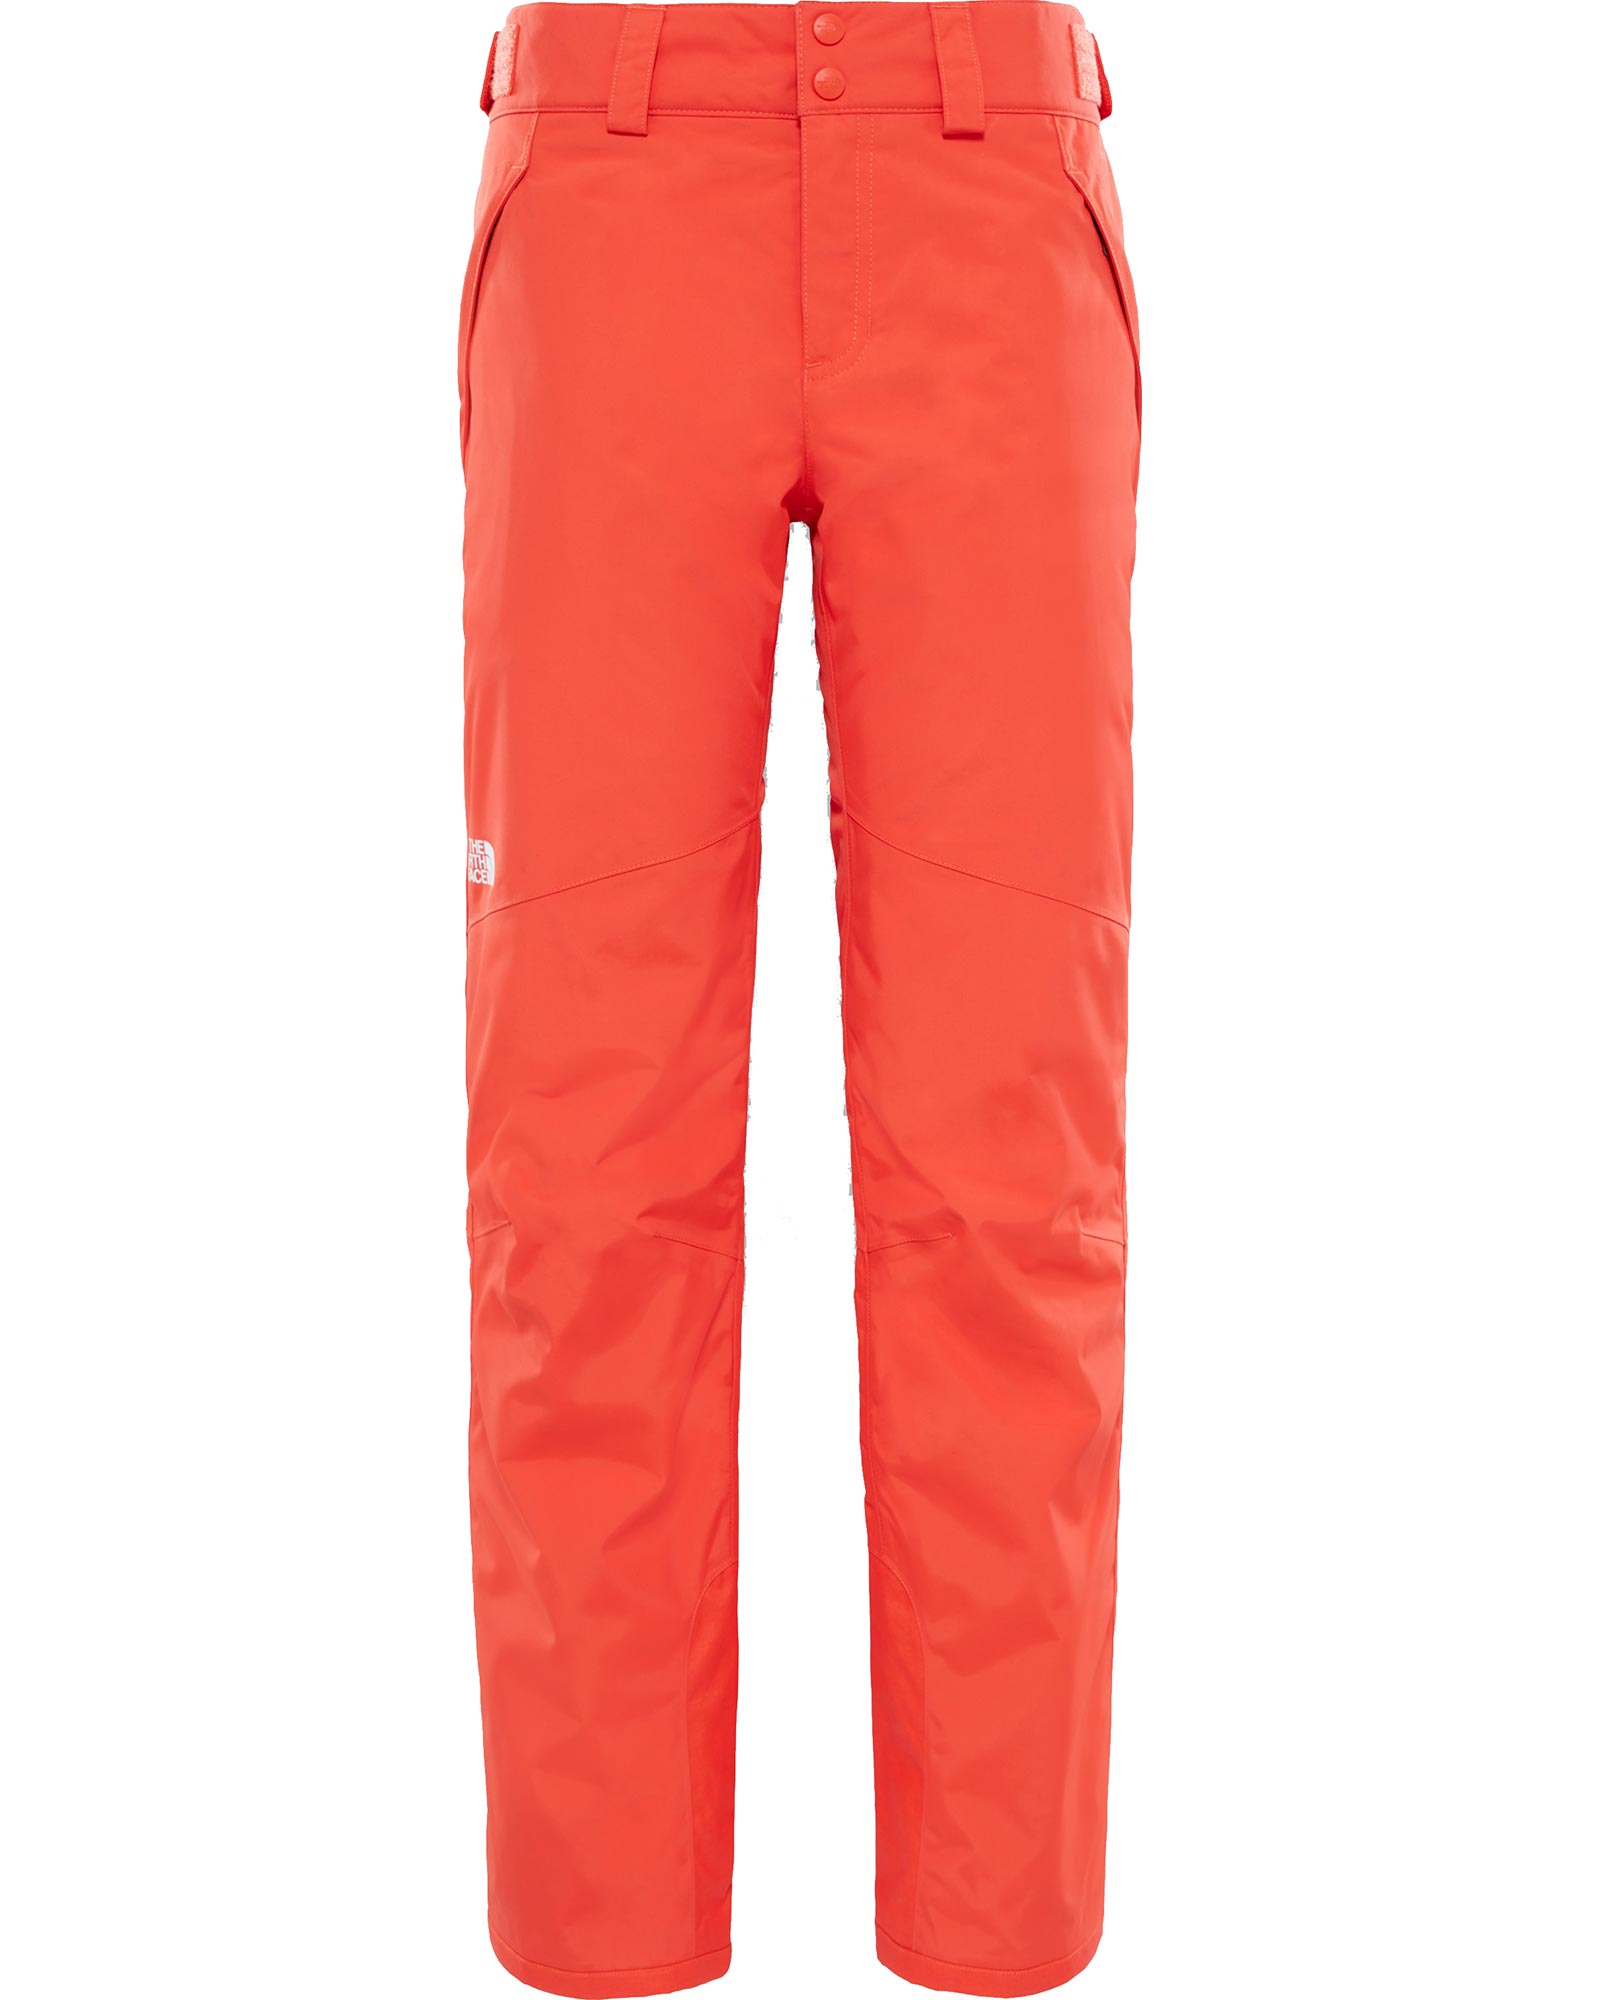 The North Face Presena DryVent Women’s Pants - Fire Brick Red XS